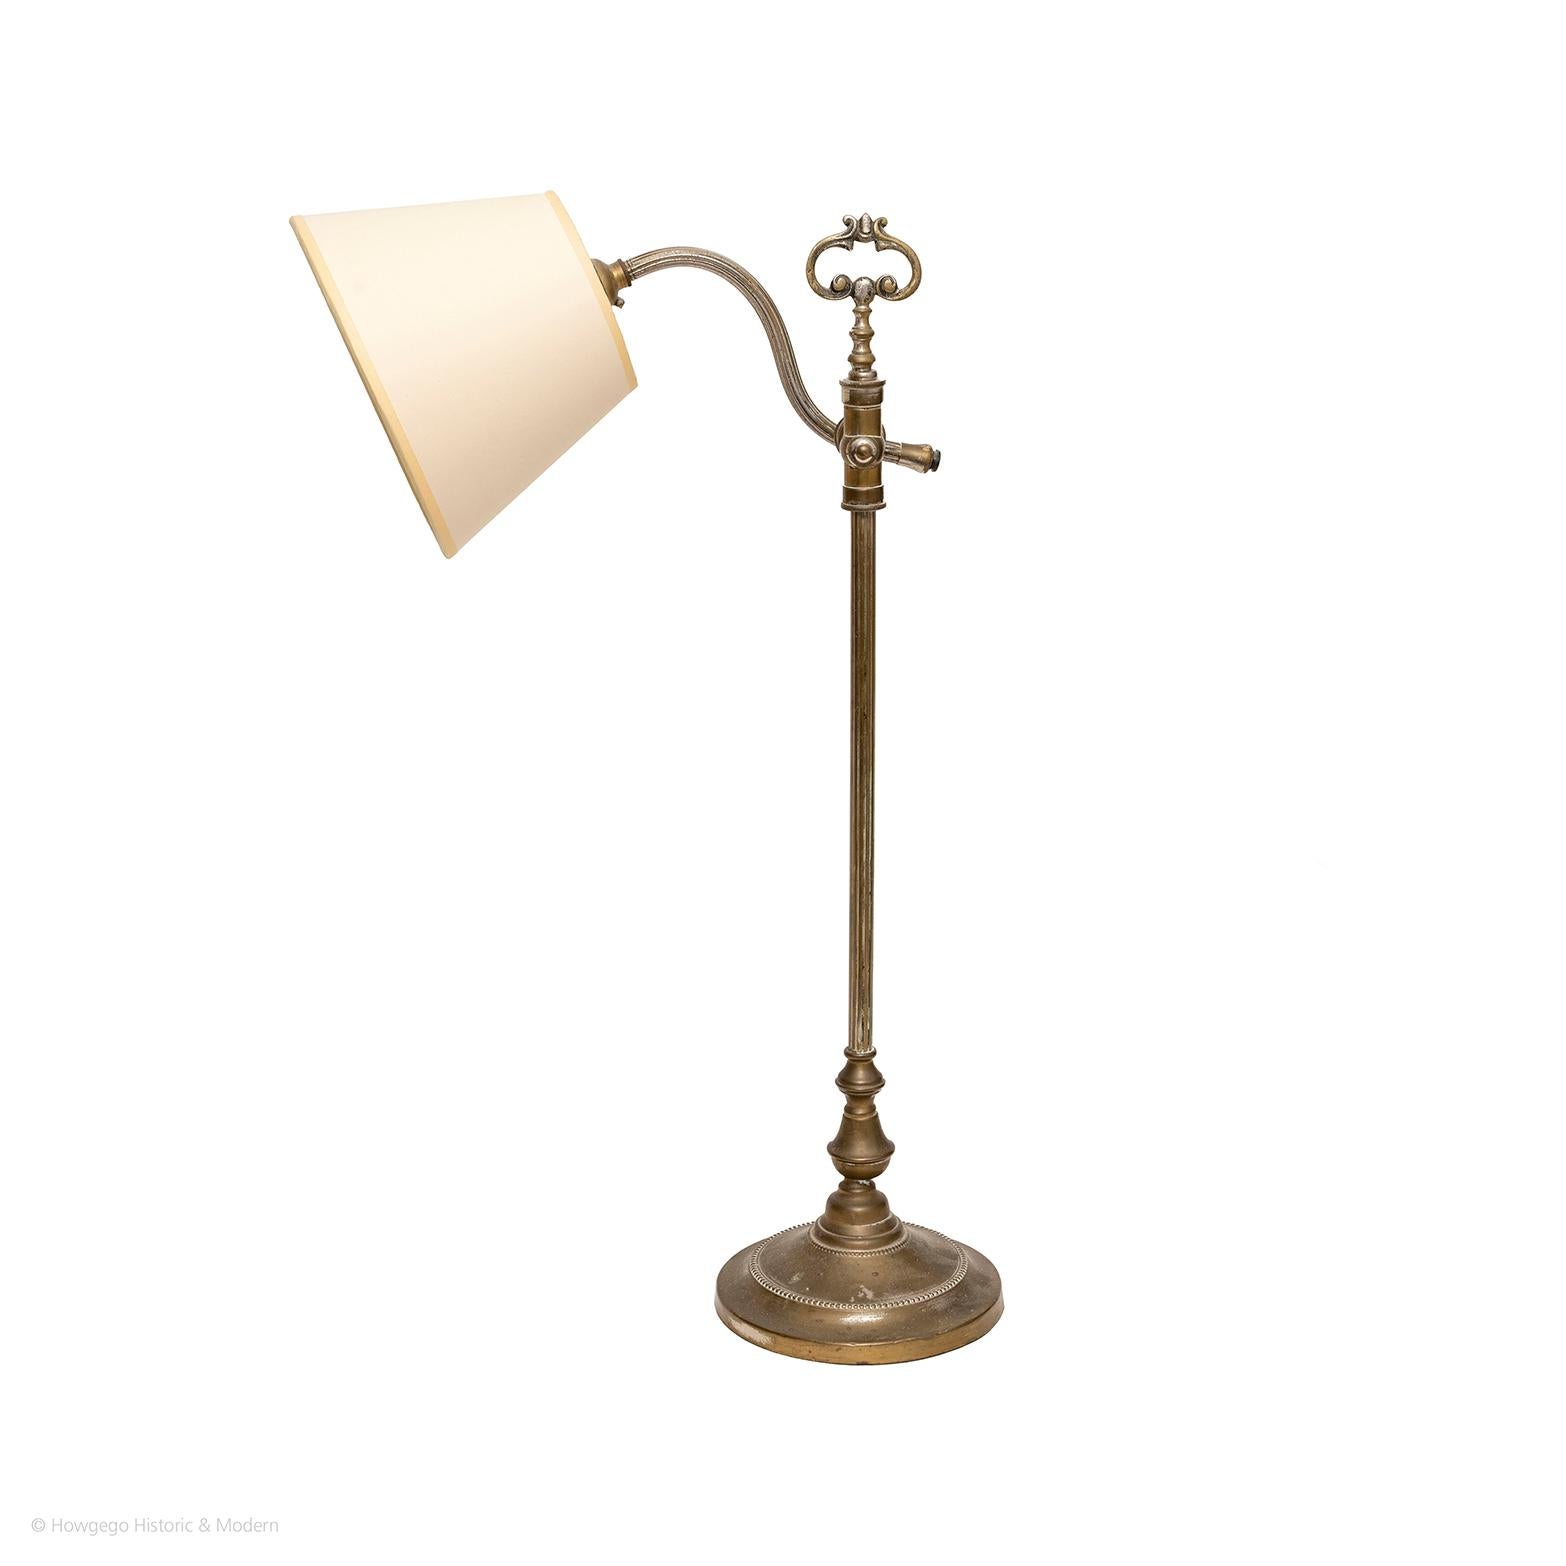 A VINTAGE, FRENCH, BRASS, READING LIGHT
Elegant, classic pared down form with no ornamentation and undecorated handle.
Practical and suitable for everyday use.
The brass has developed a mellow, patina which can be polished if required.
Blends